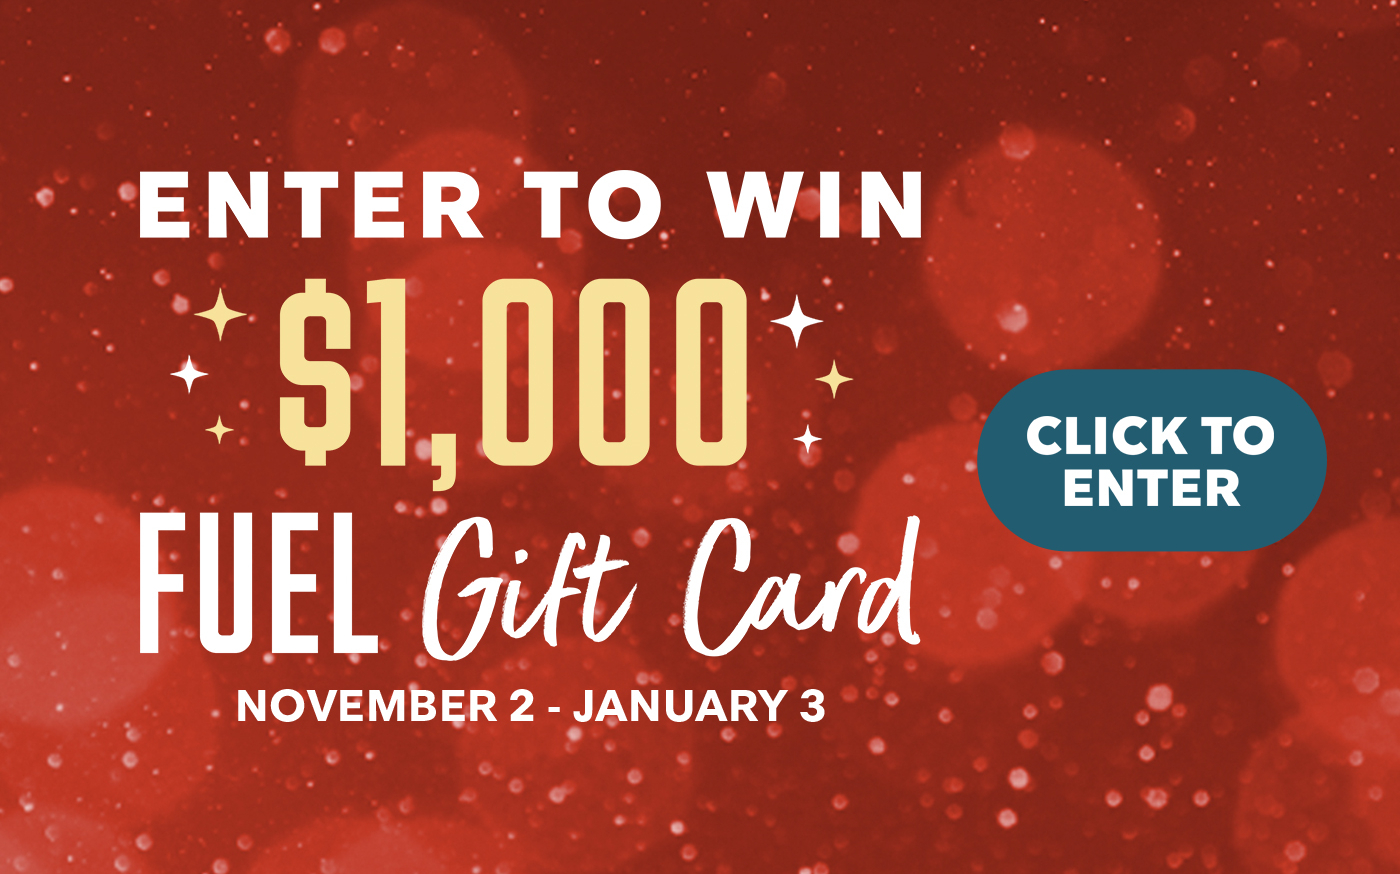 Enter to Win $1000 Fuel Gift Card Giveaway at 24 hr convenience store Dash In